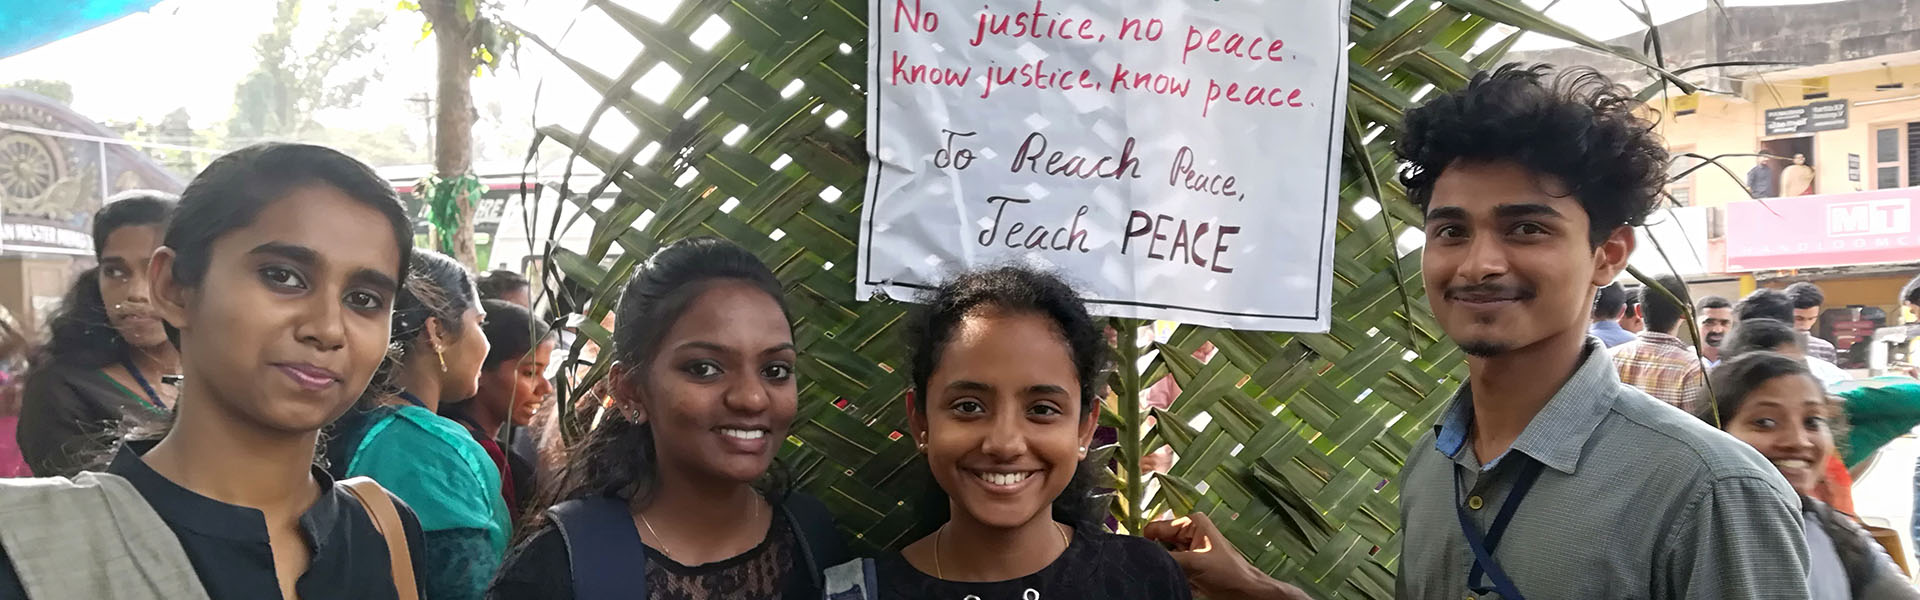 4 Youth with peace banner